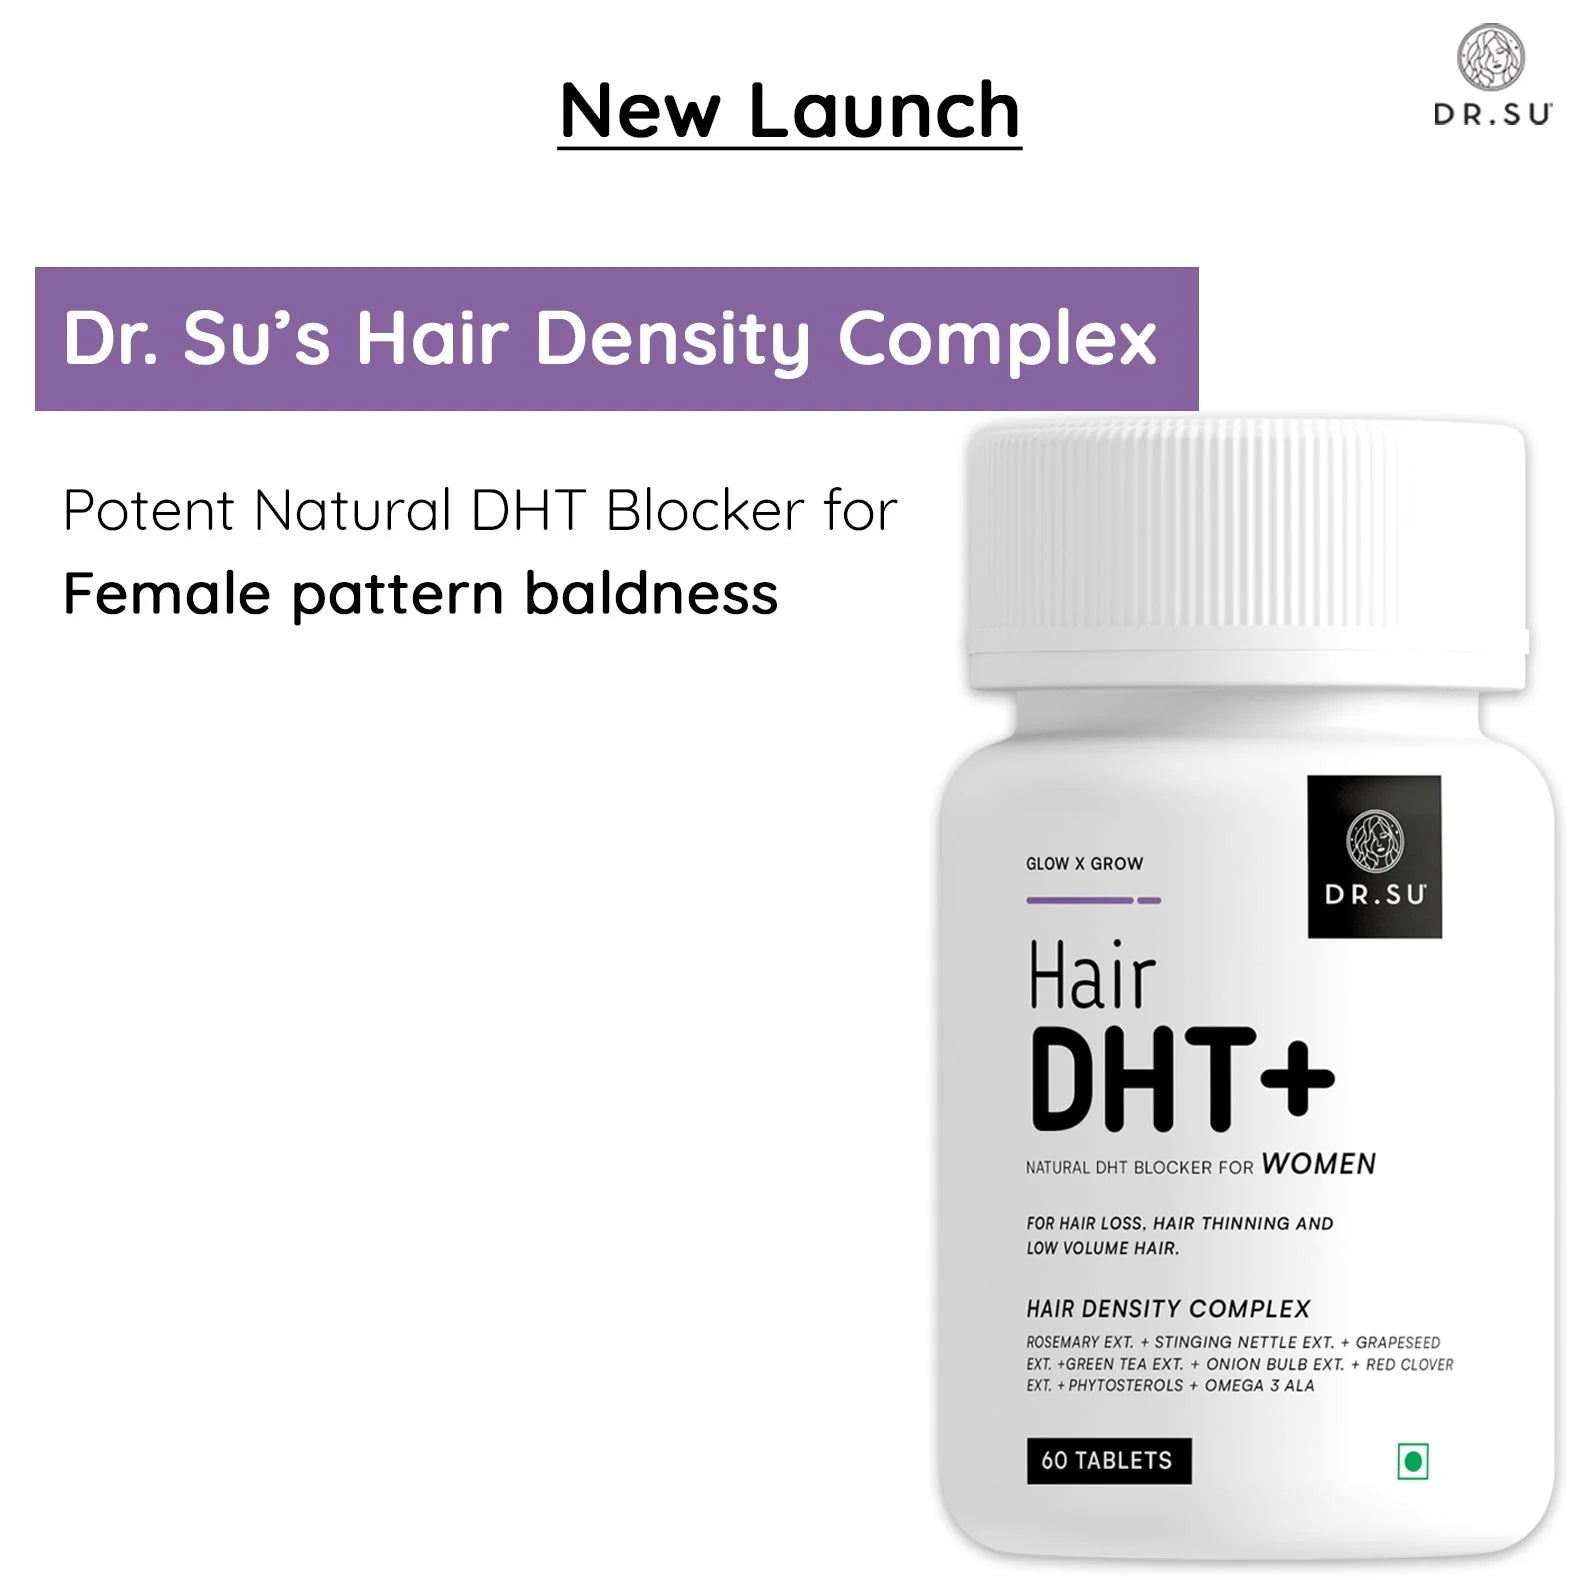 Dr. Su Hair DHT+ for Women